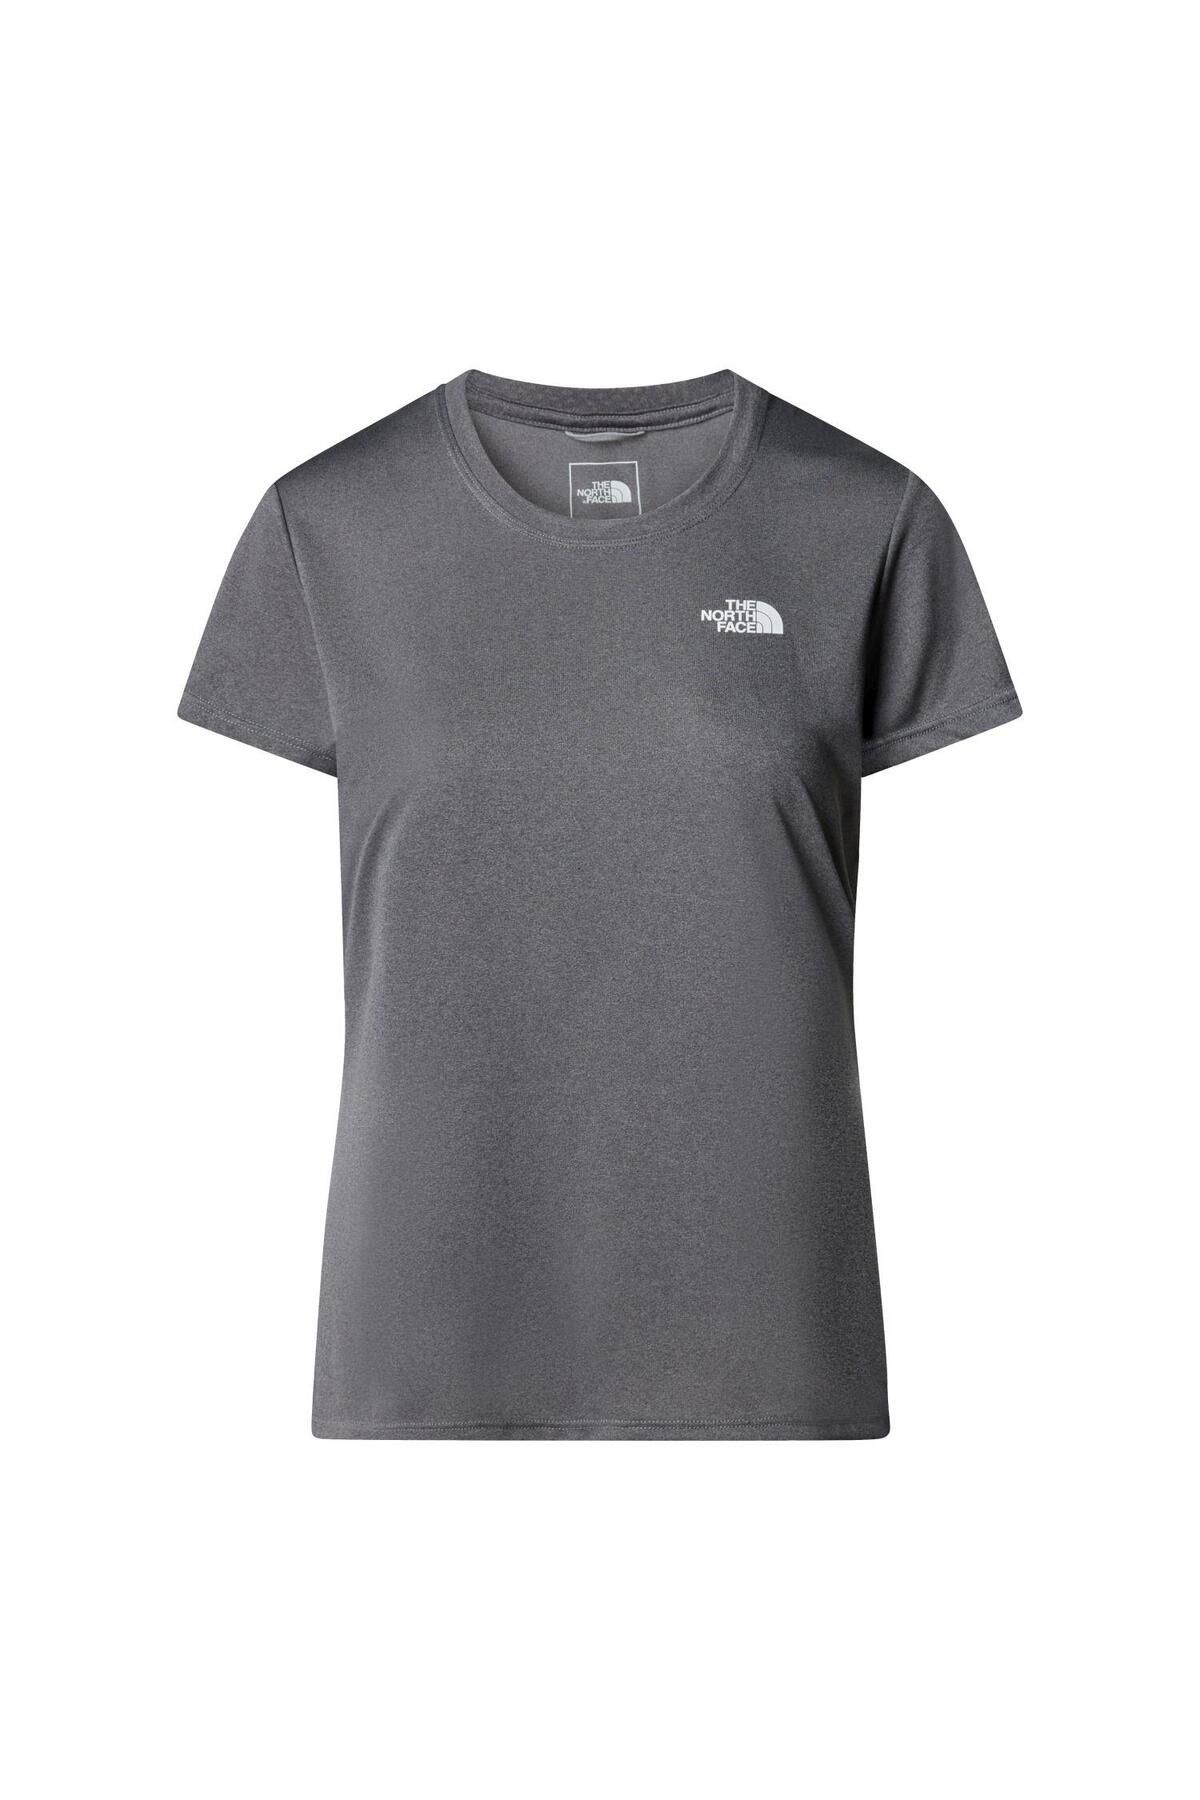 The North Face W REAXION AMP CREW - EU  T-Shirt NF00CE0T0V31 Gri-XS